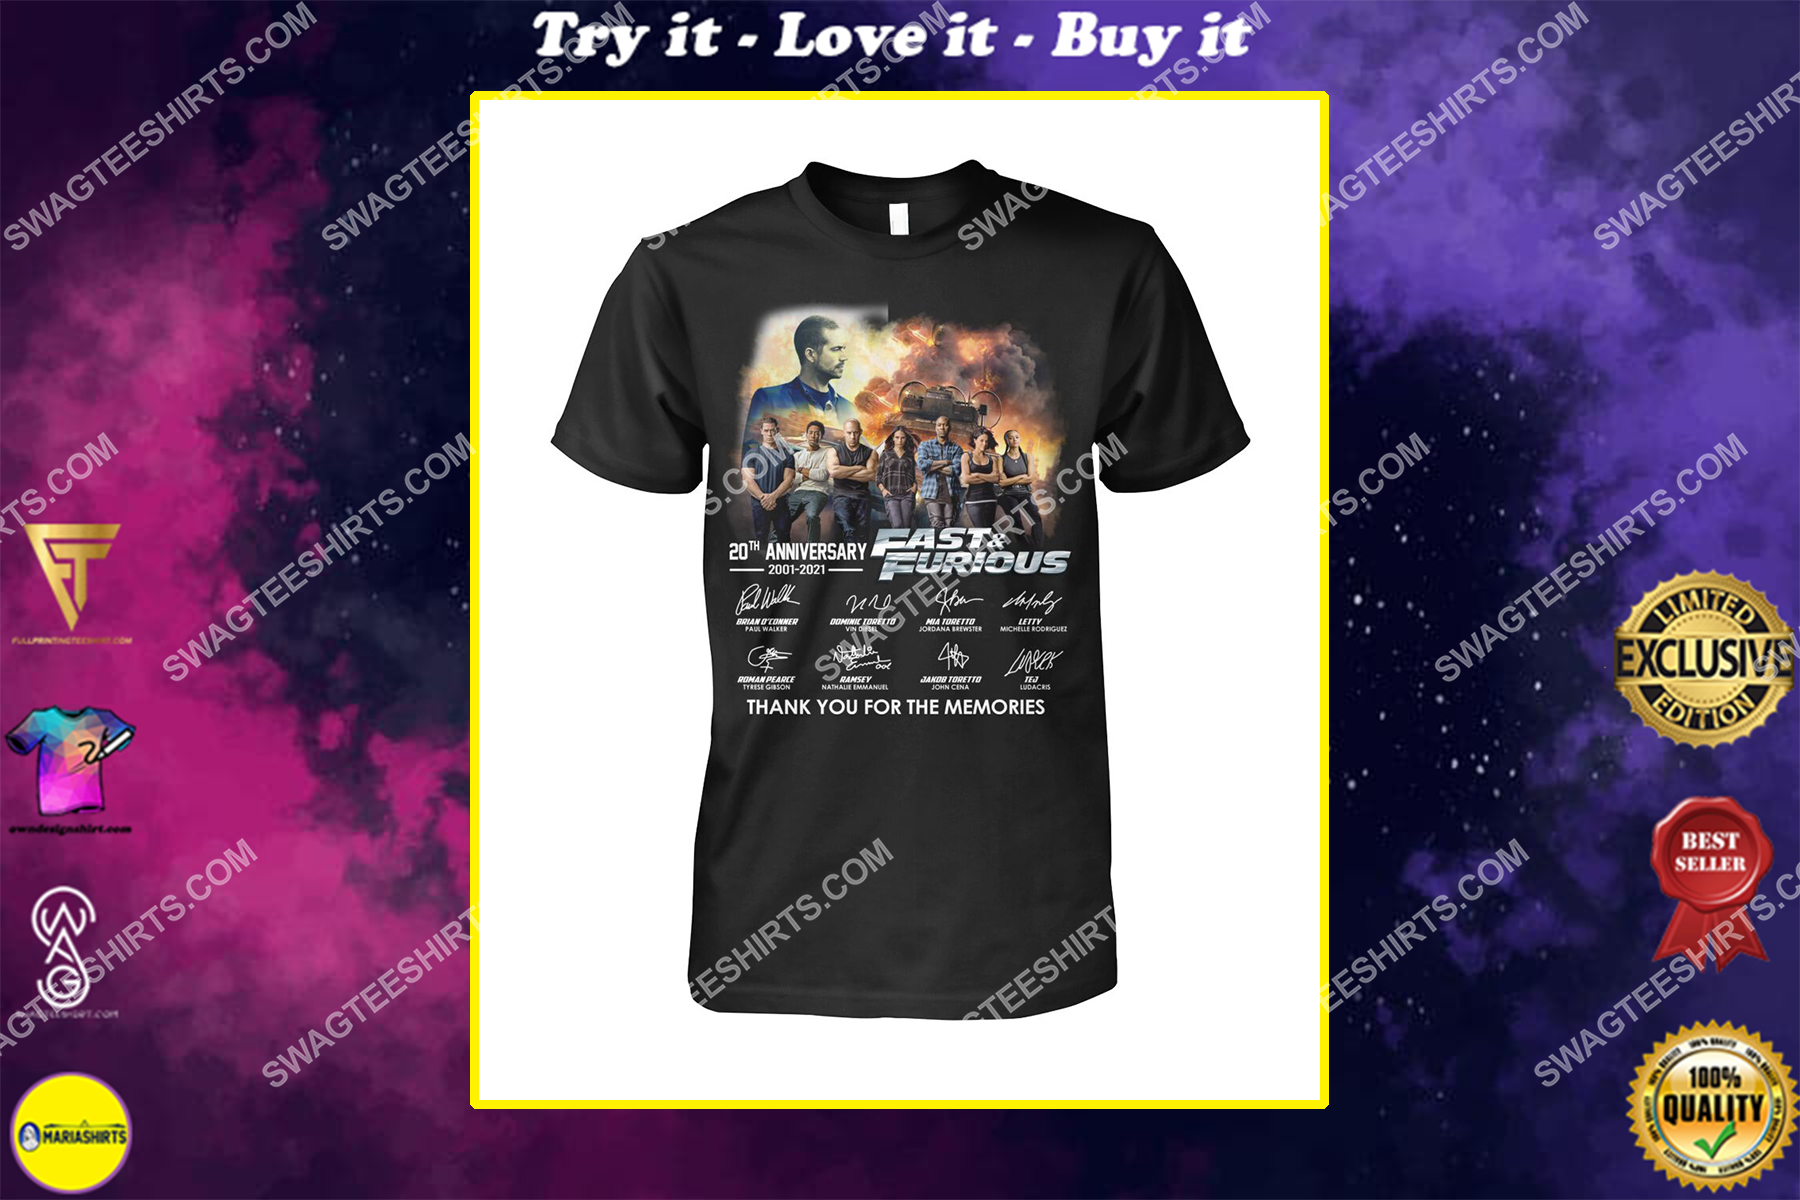 20th anniversary fast and furious thank you for memories shirt